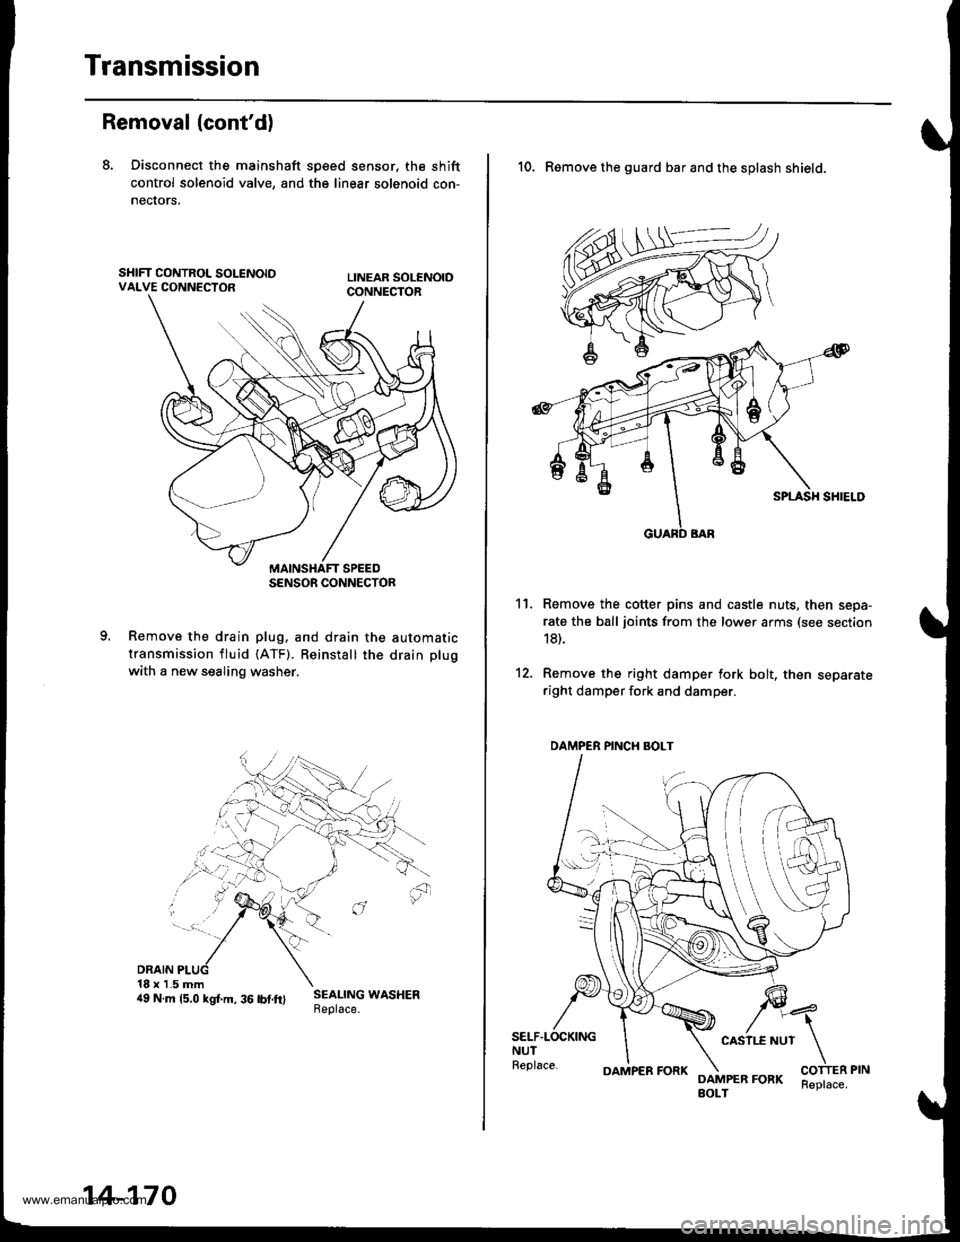 HONDA CR-V 2000 RD1-RD3 / 1.G Workshop Manual 
Transmission
Removal (contd)
8. Disconnect the mainshaft sp€ed sensor, the shift
control solenoid valve, and the linear solenoid con-
necrors,
Remove the drain plug. and drain the automatic
transm